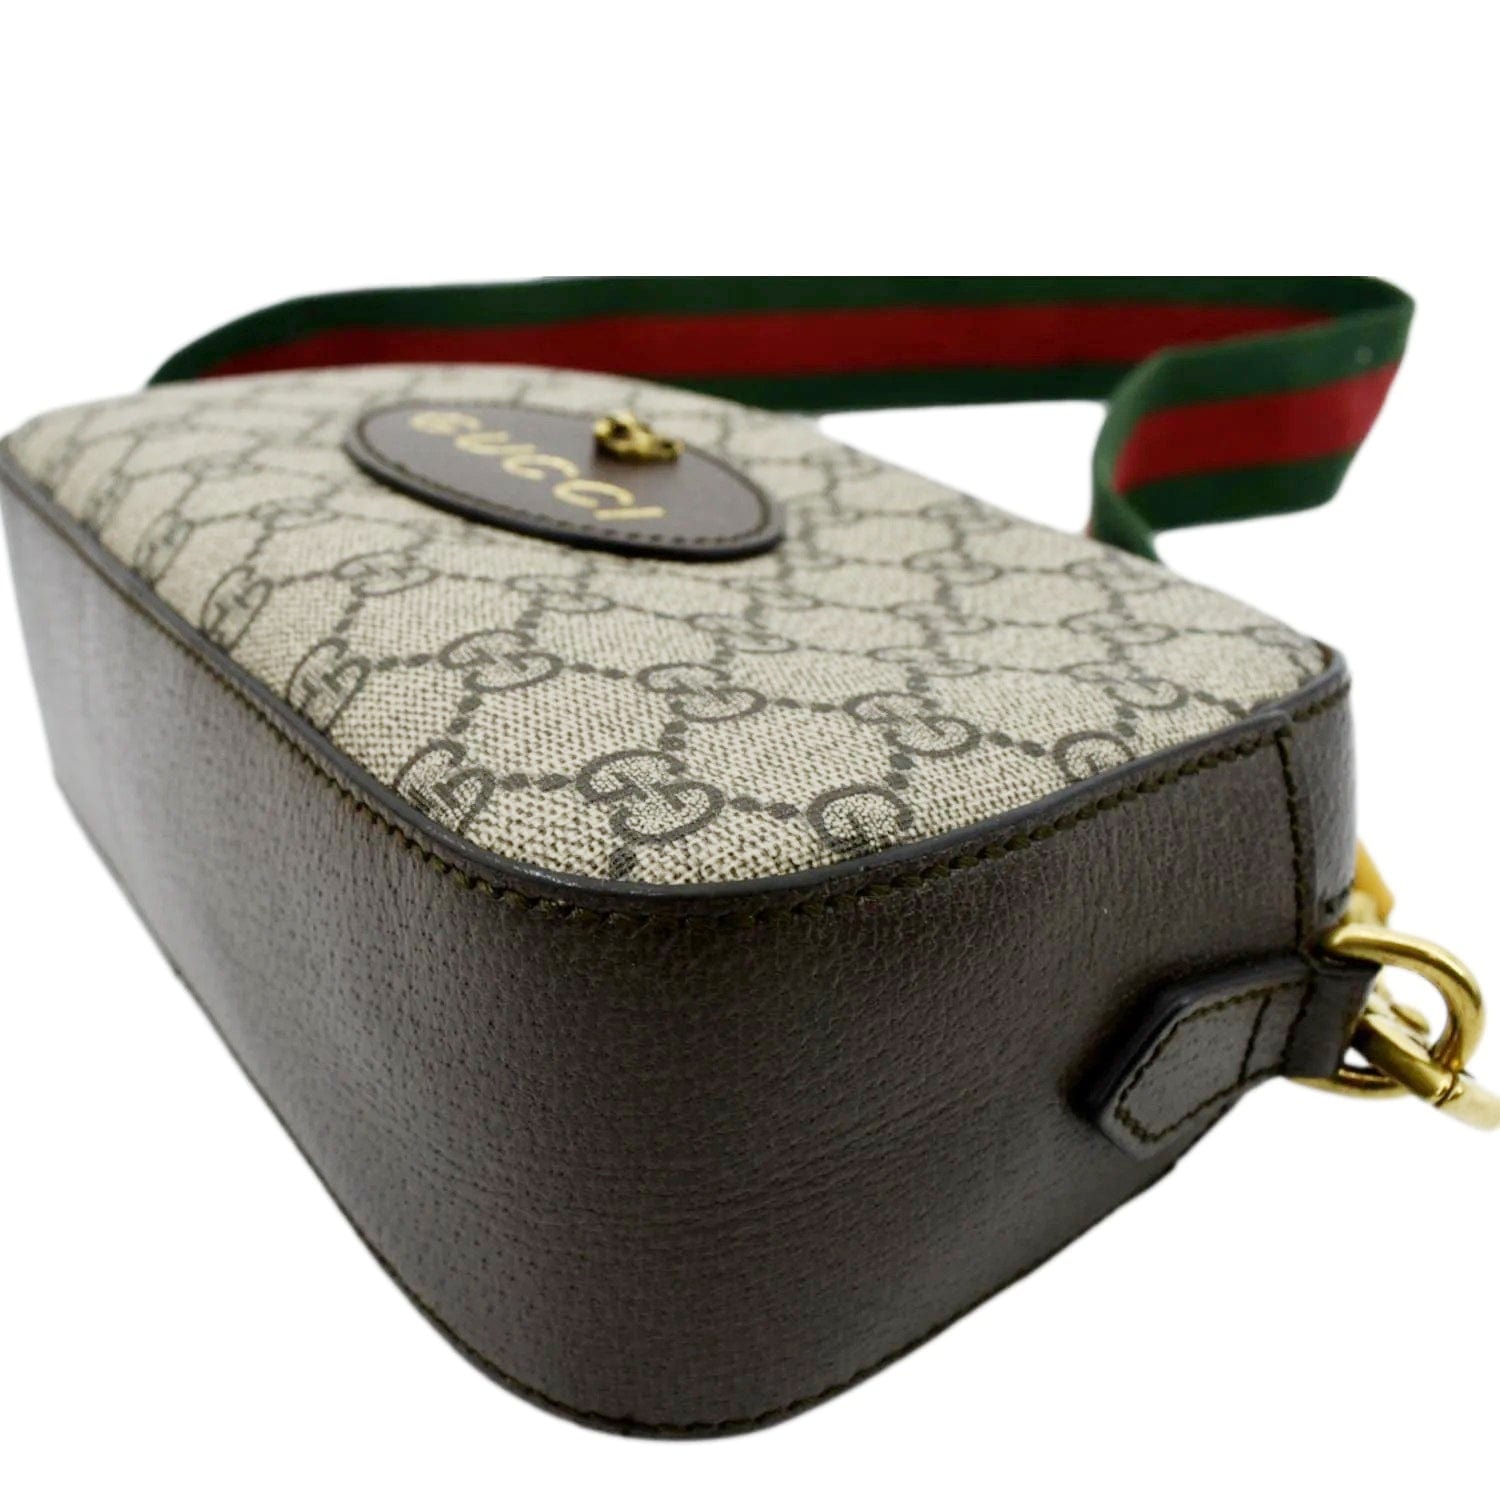 Gucci Neo Vintage Leather Clutch Bag